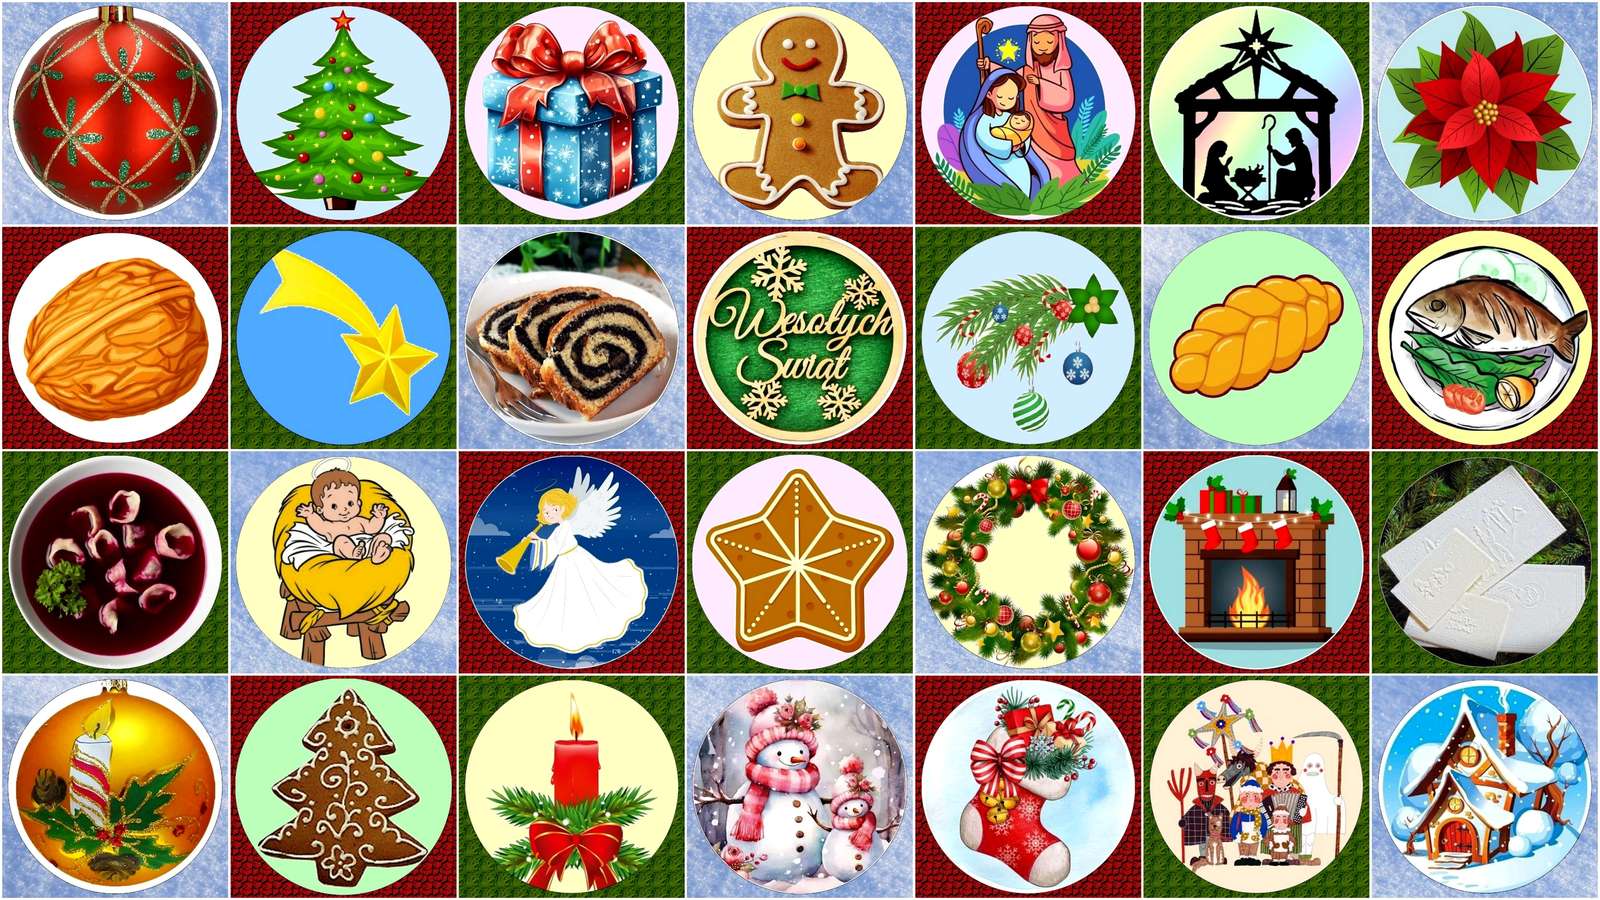 Merry Christmas puzzle online from photo